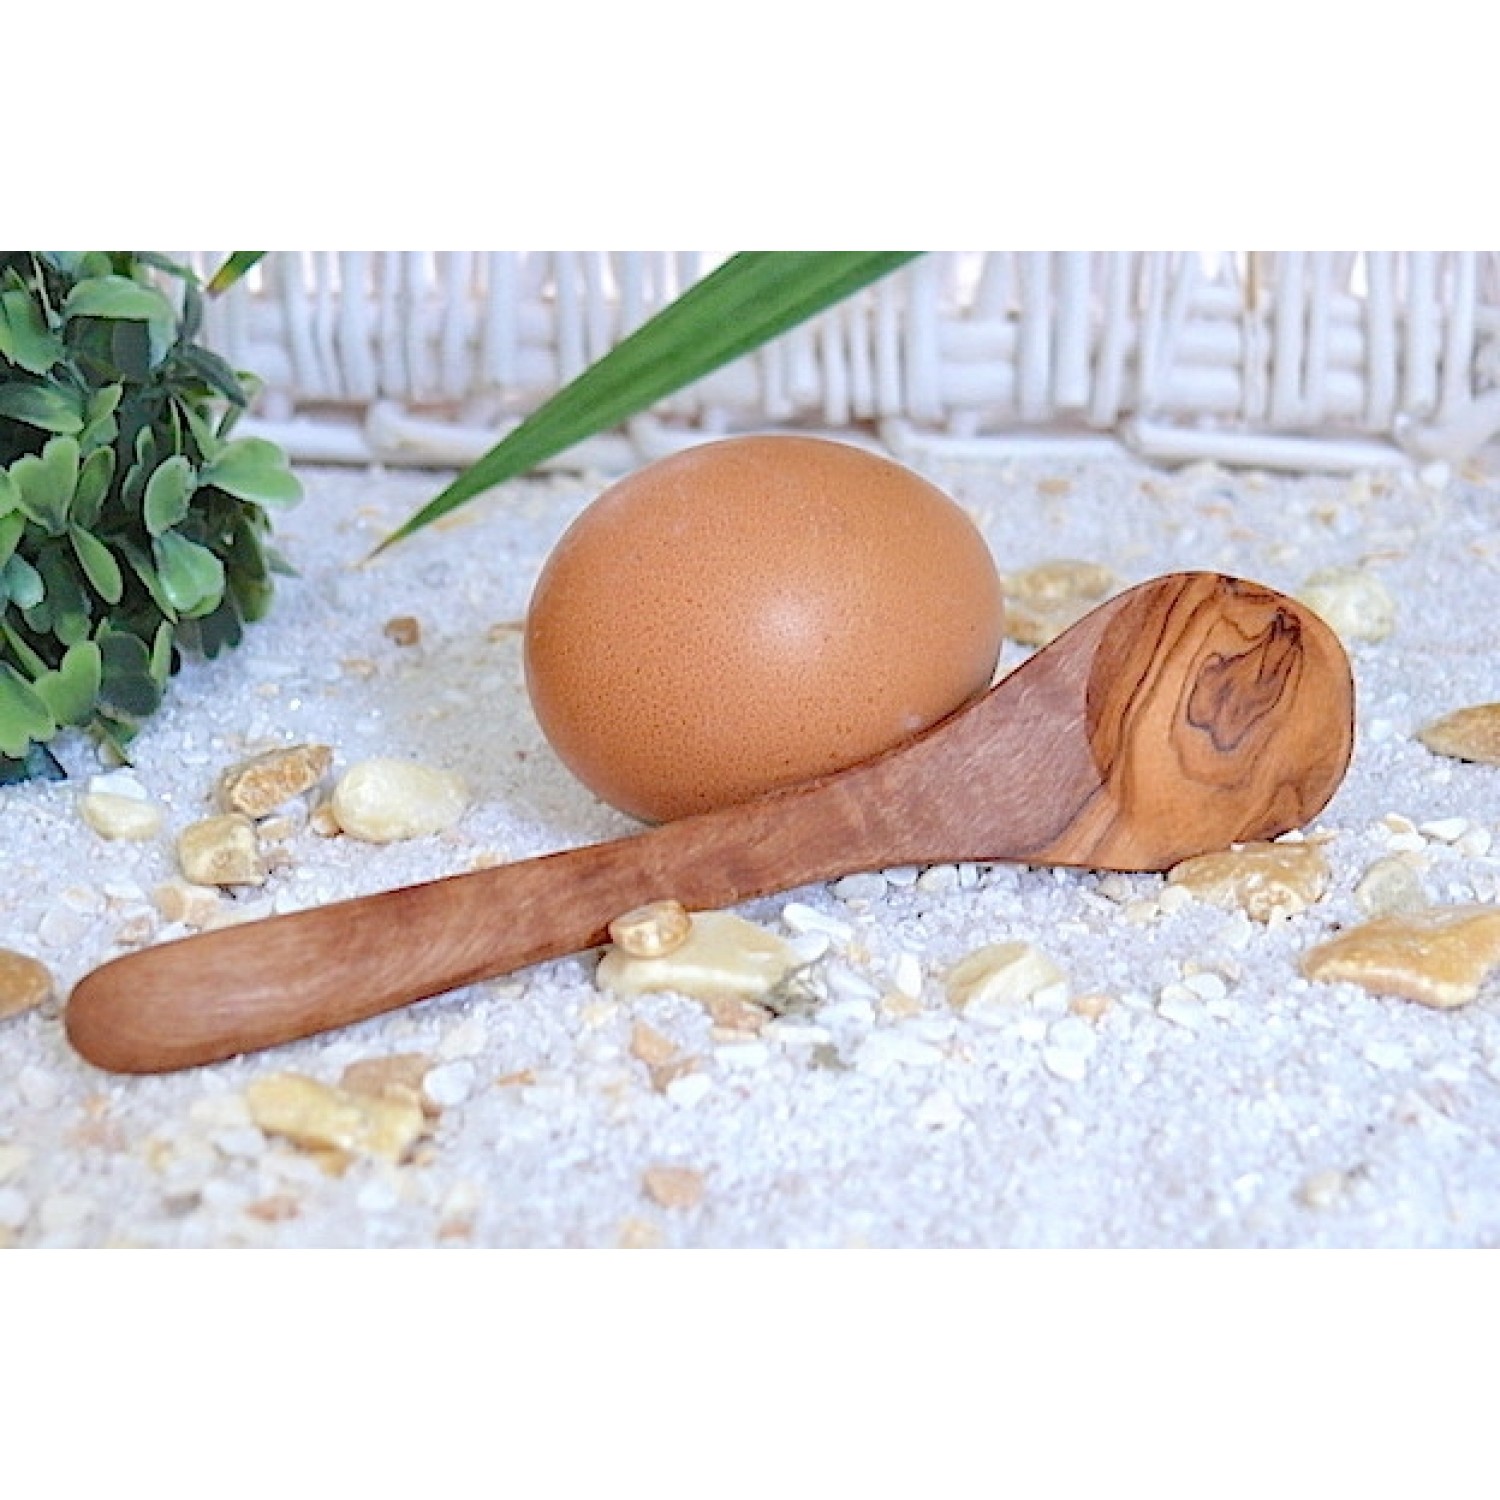 Egg Spoon made of Olive Wood | D.O.M.